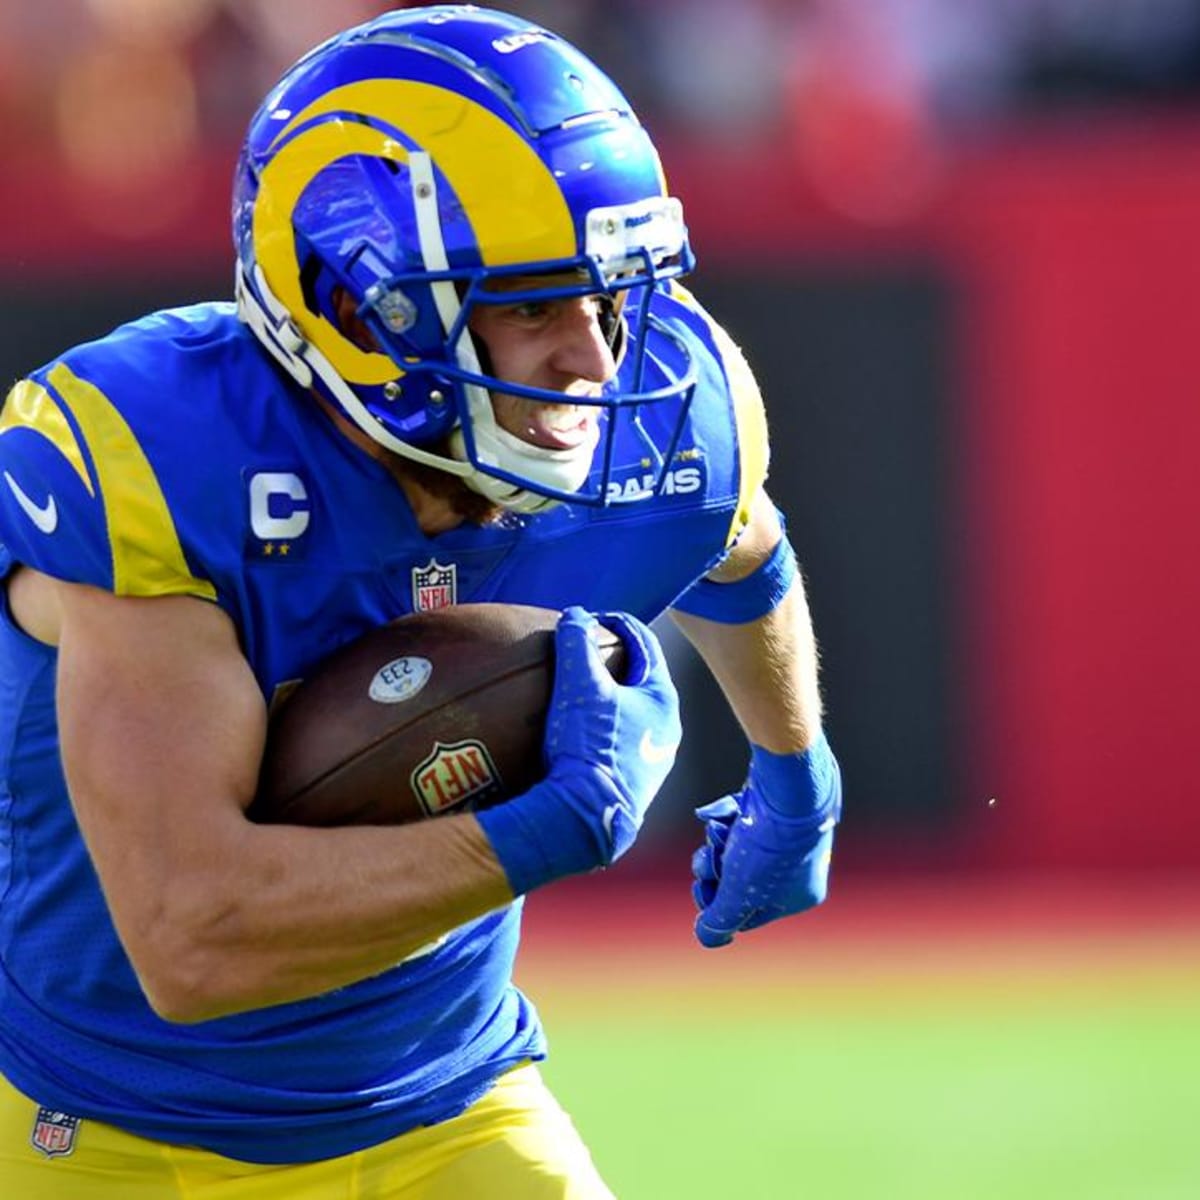 NFL Player Props: Cooper Kupp Receptions, Receiving Yards and